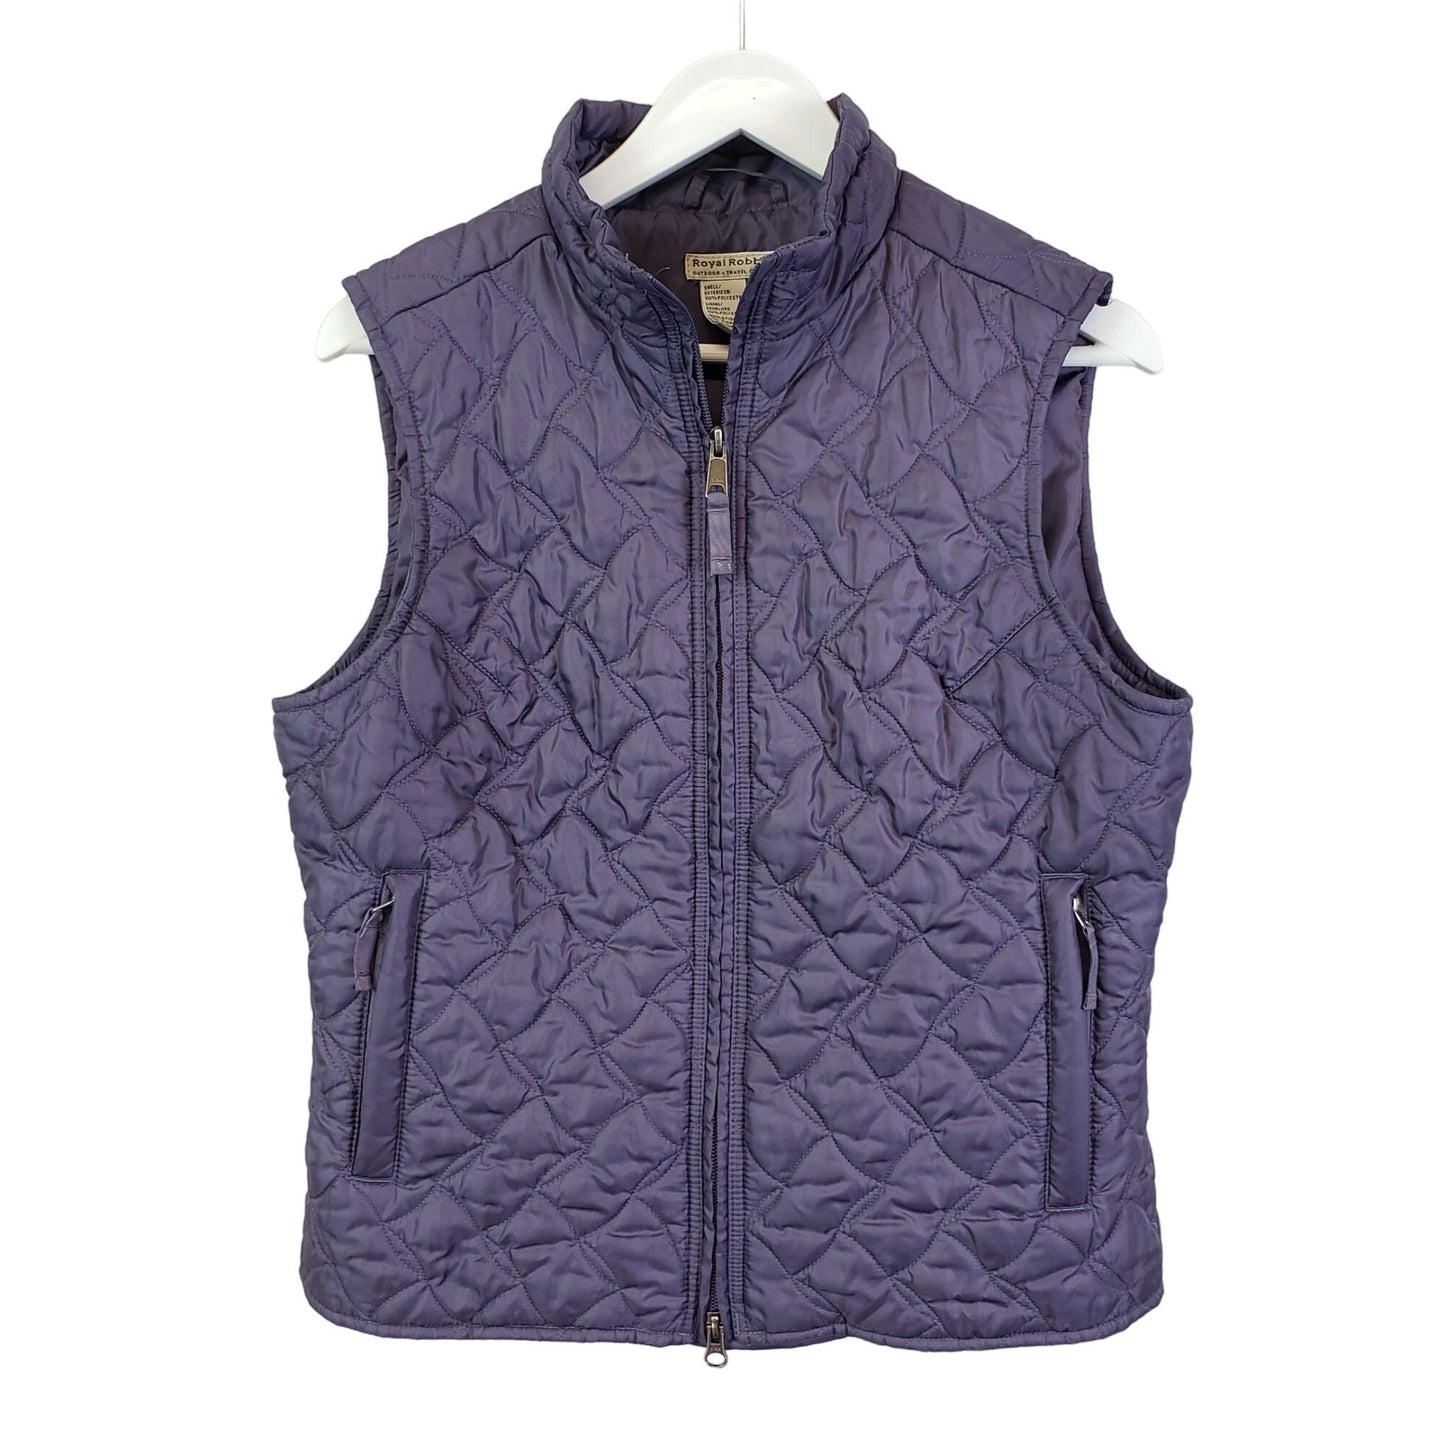 Royal Robbins Quilted Full Zip Vest Size Medium